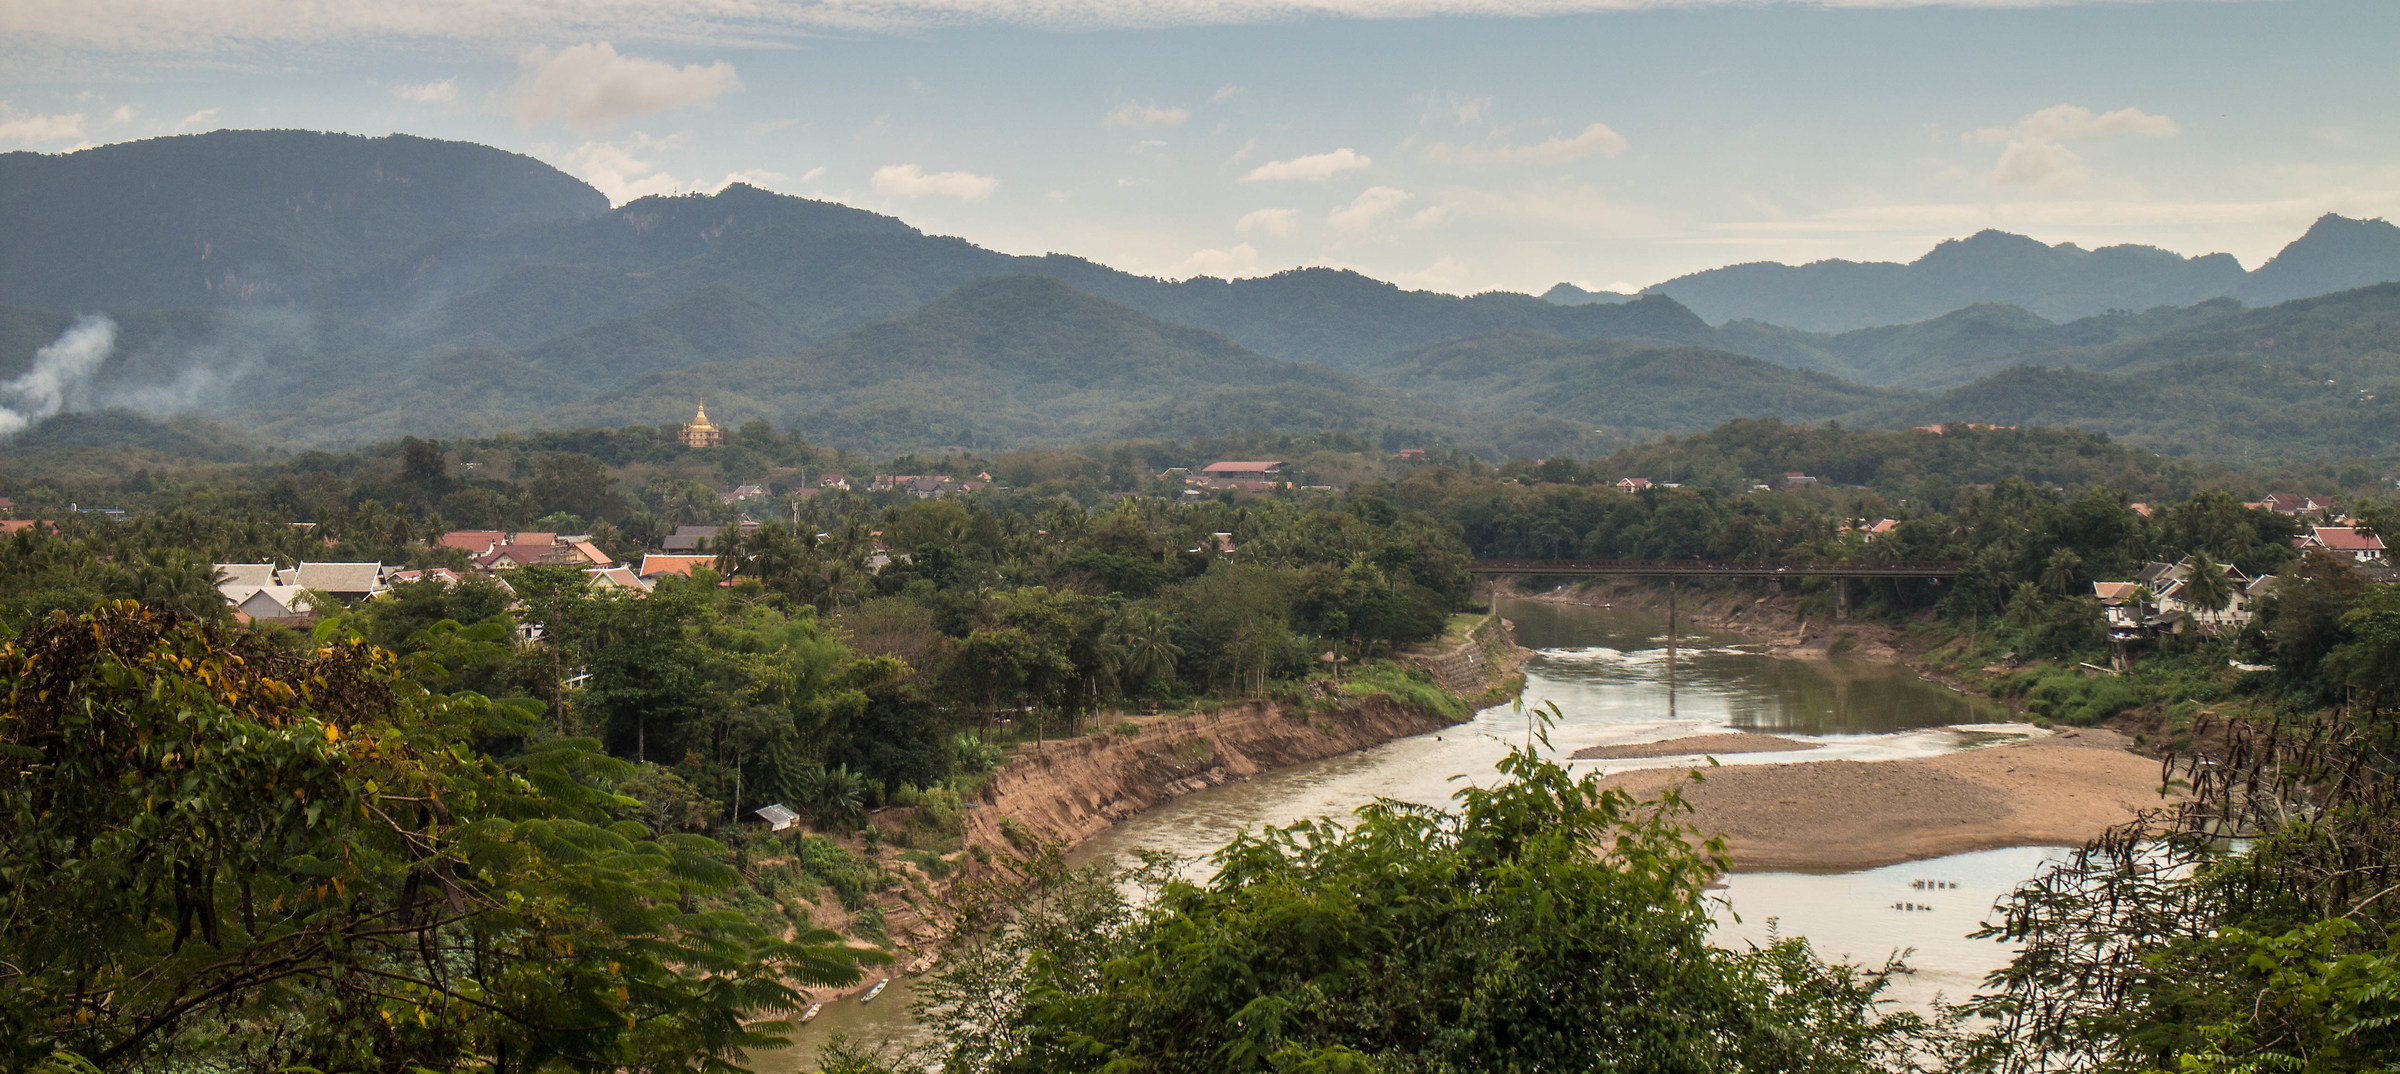 Nam ou river, tributary of the Mekong...